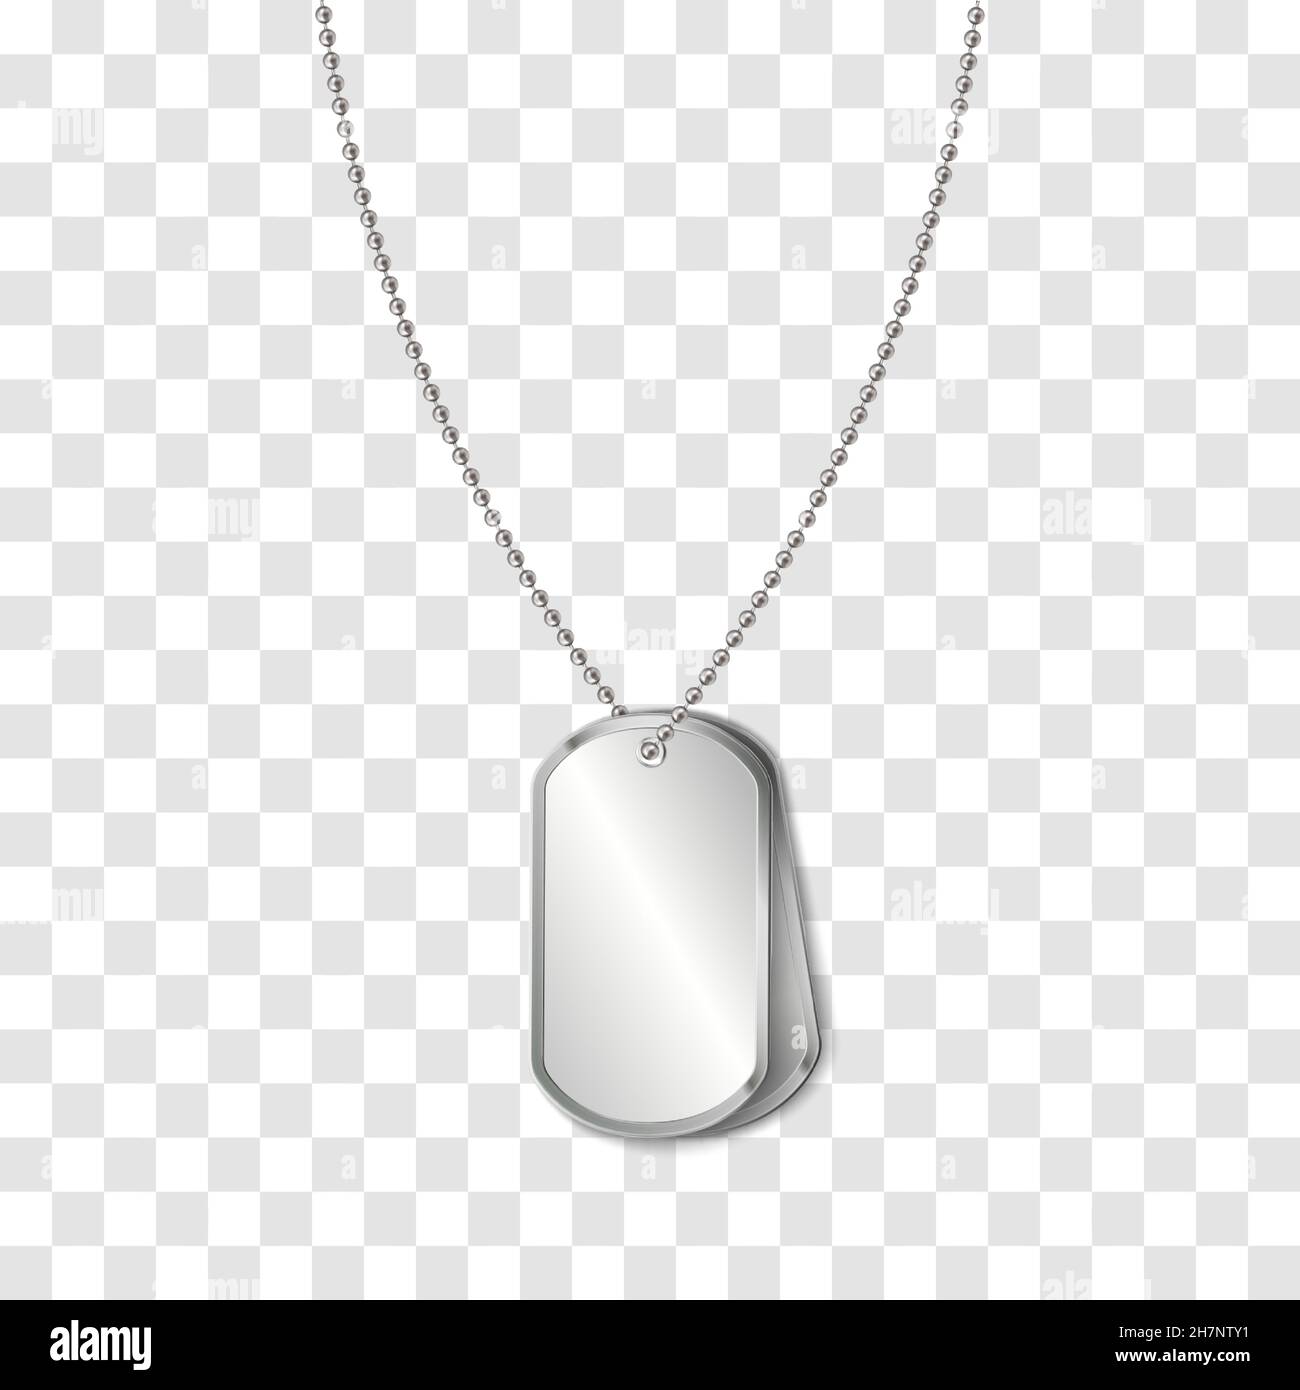 Vector identification tags worn by military personnel. Soldier military dog tag on transparent background. Stock Vector